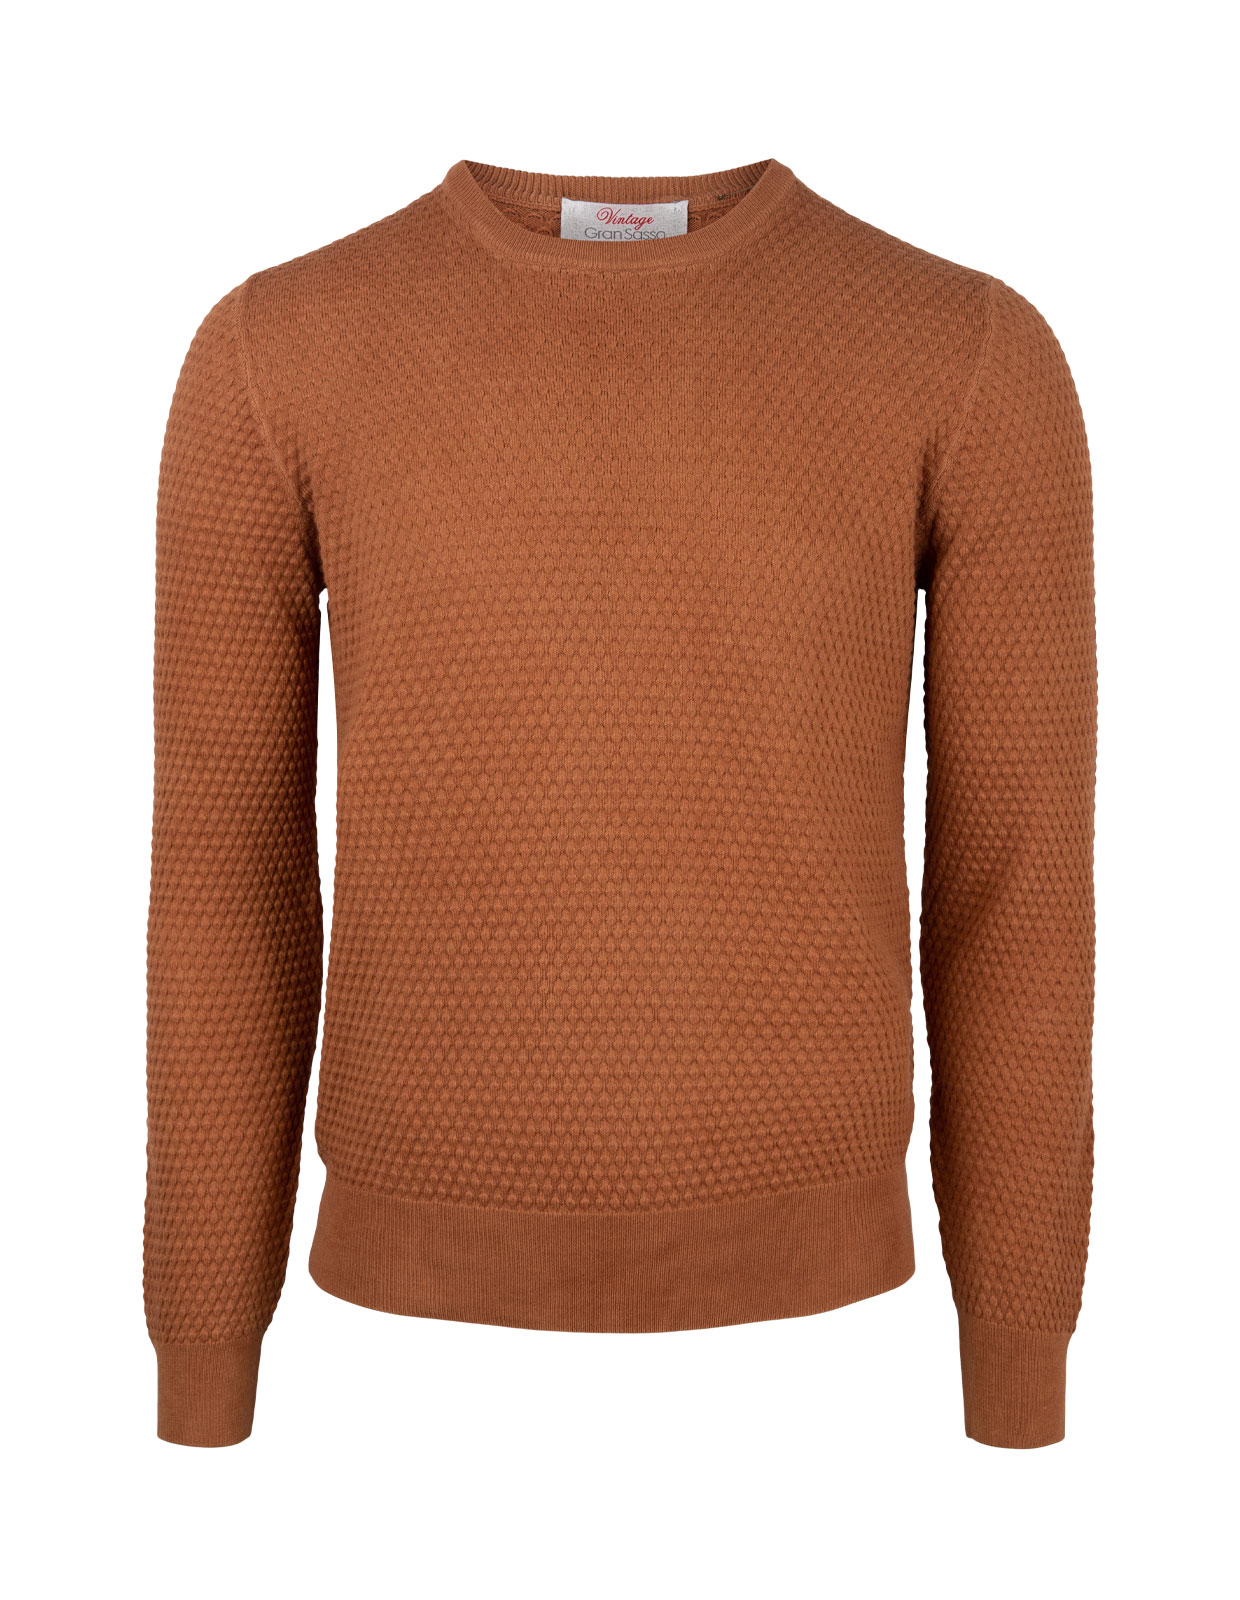 Crew Neck Knitted Texture Cotton Tobacco Stl 48